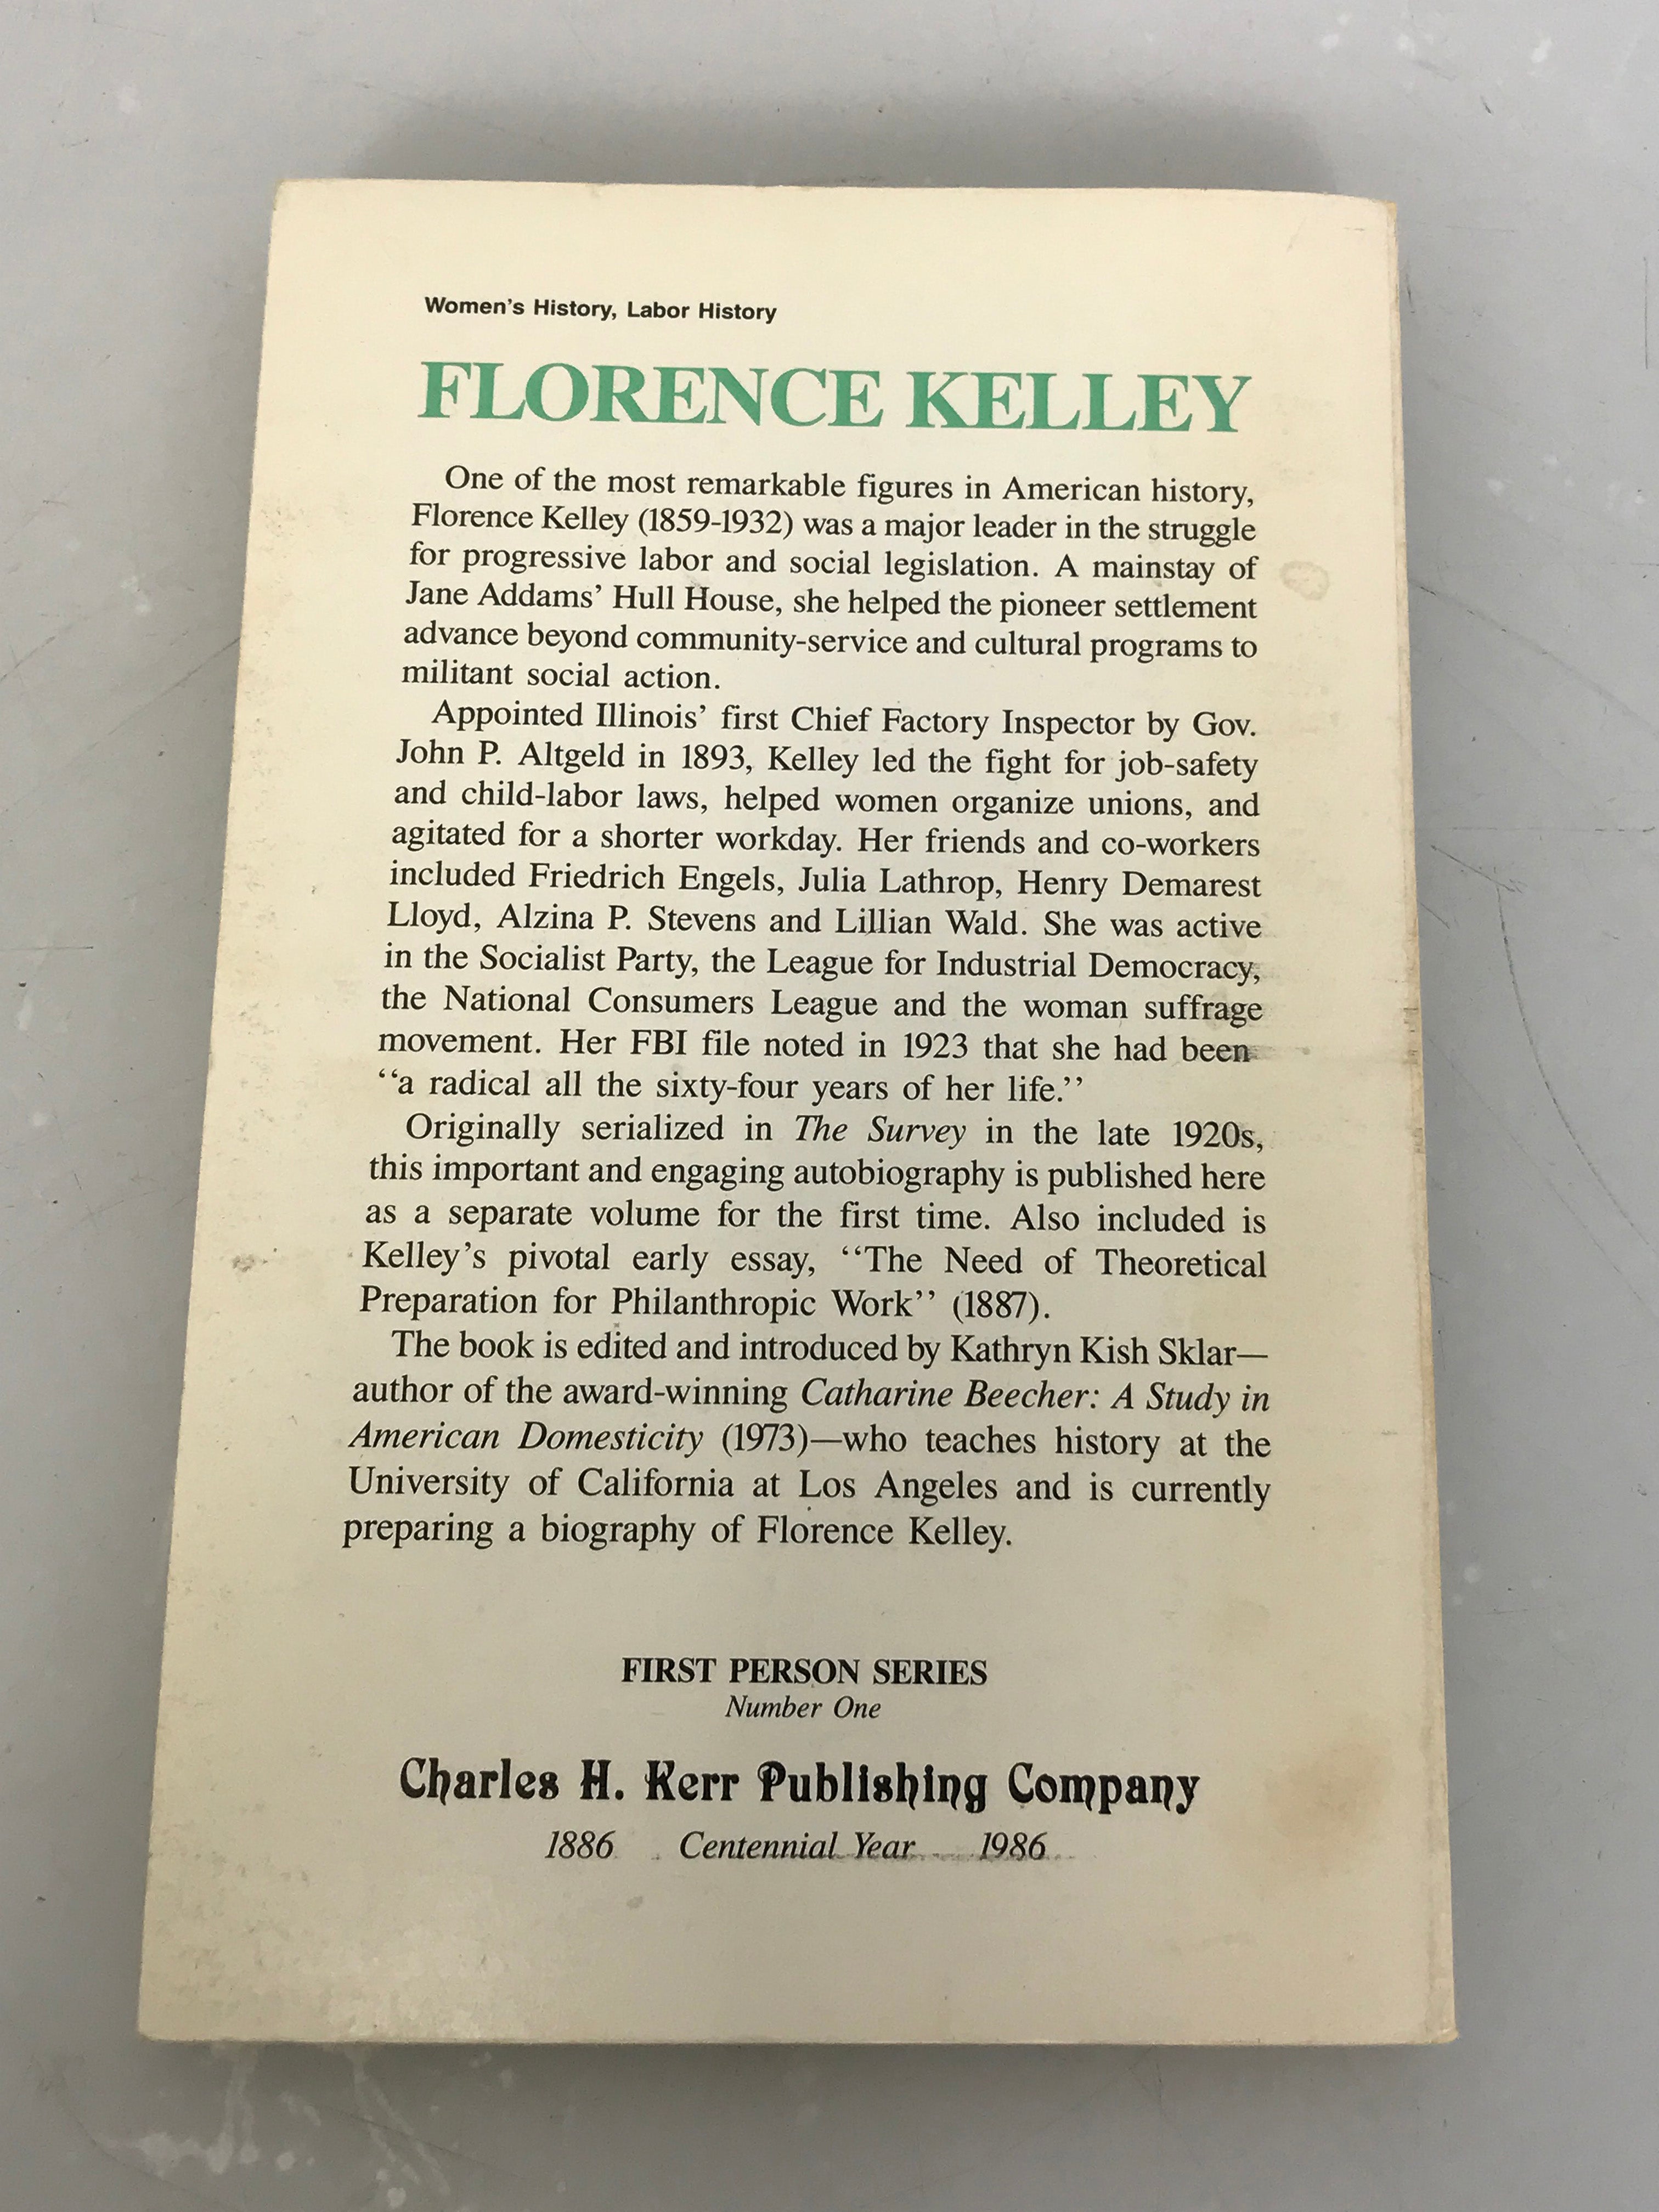 The Autobiography of Florence Kelley Edited by Kathryn Kish Sklar 1986 SC